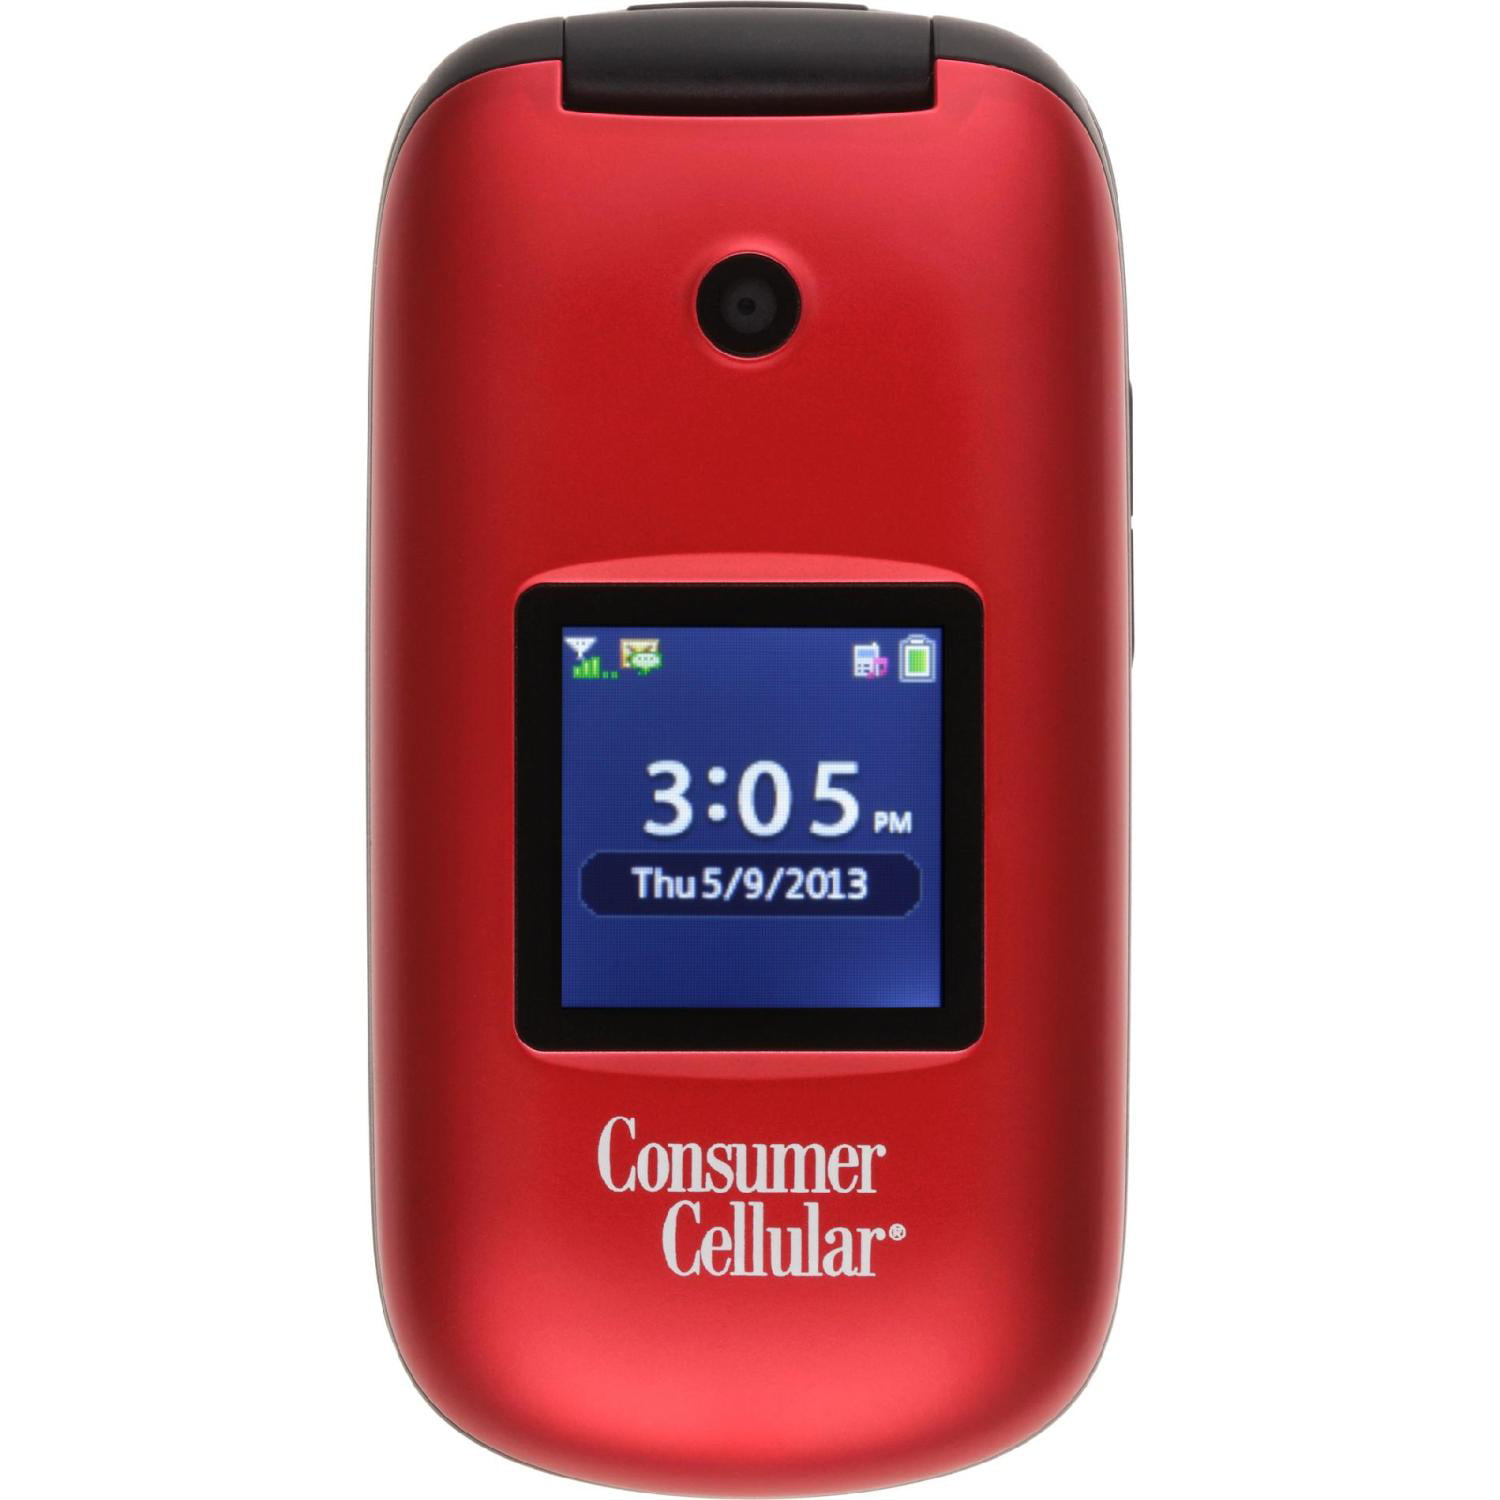 Consumer Cellular Wireless Home Phone Reviews